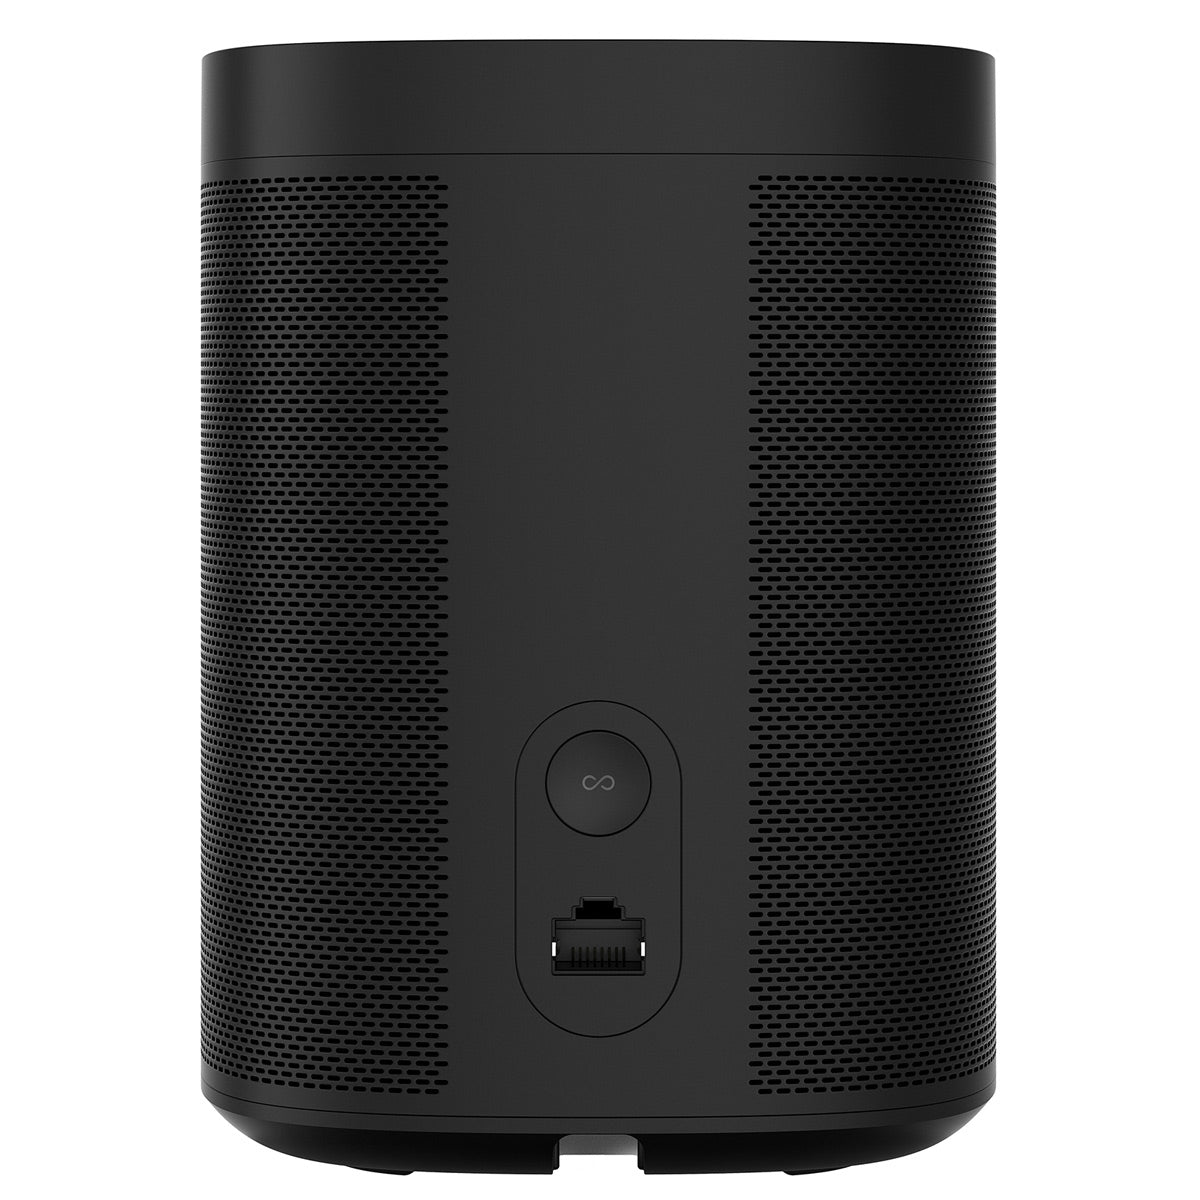 Sonos Four Room Set with Sonos One Gen 2 - Smart Speaker with Voice Control Built-In (Black)